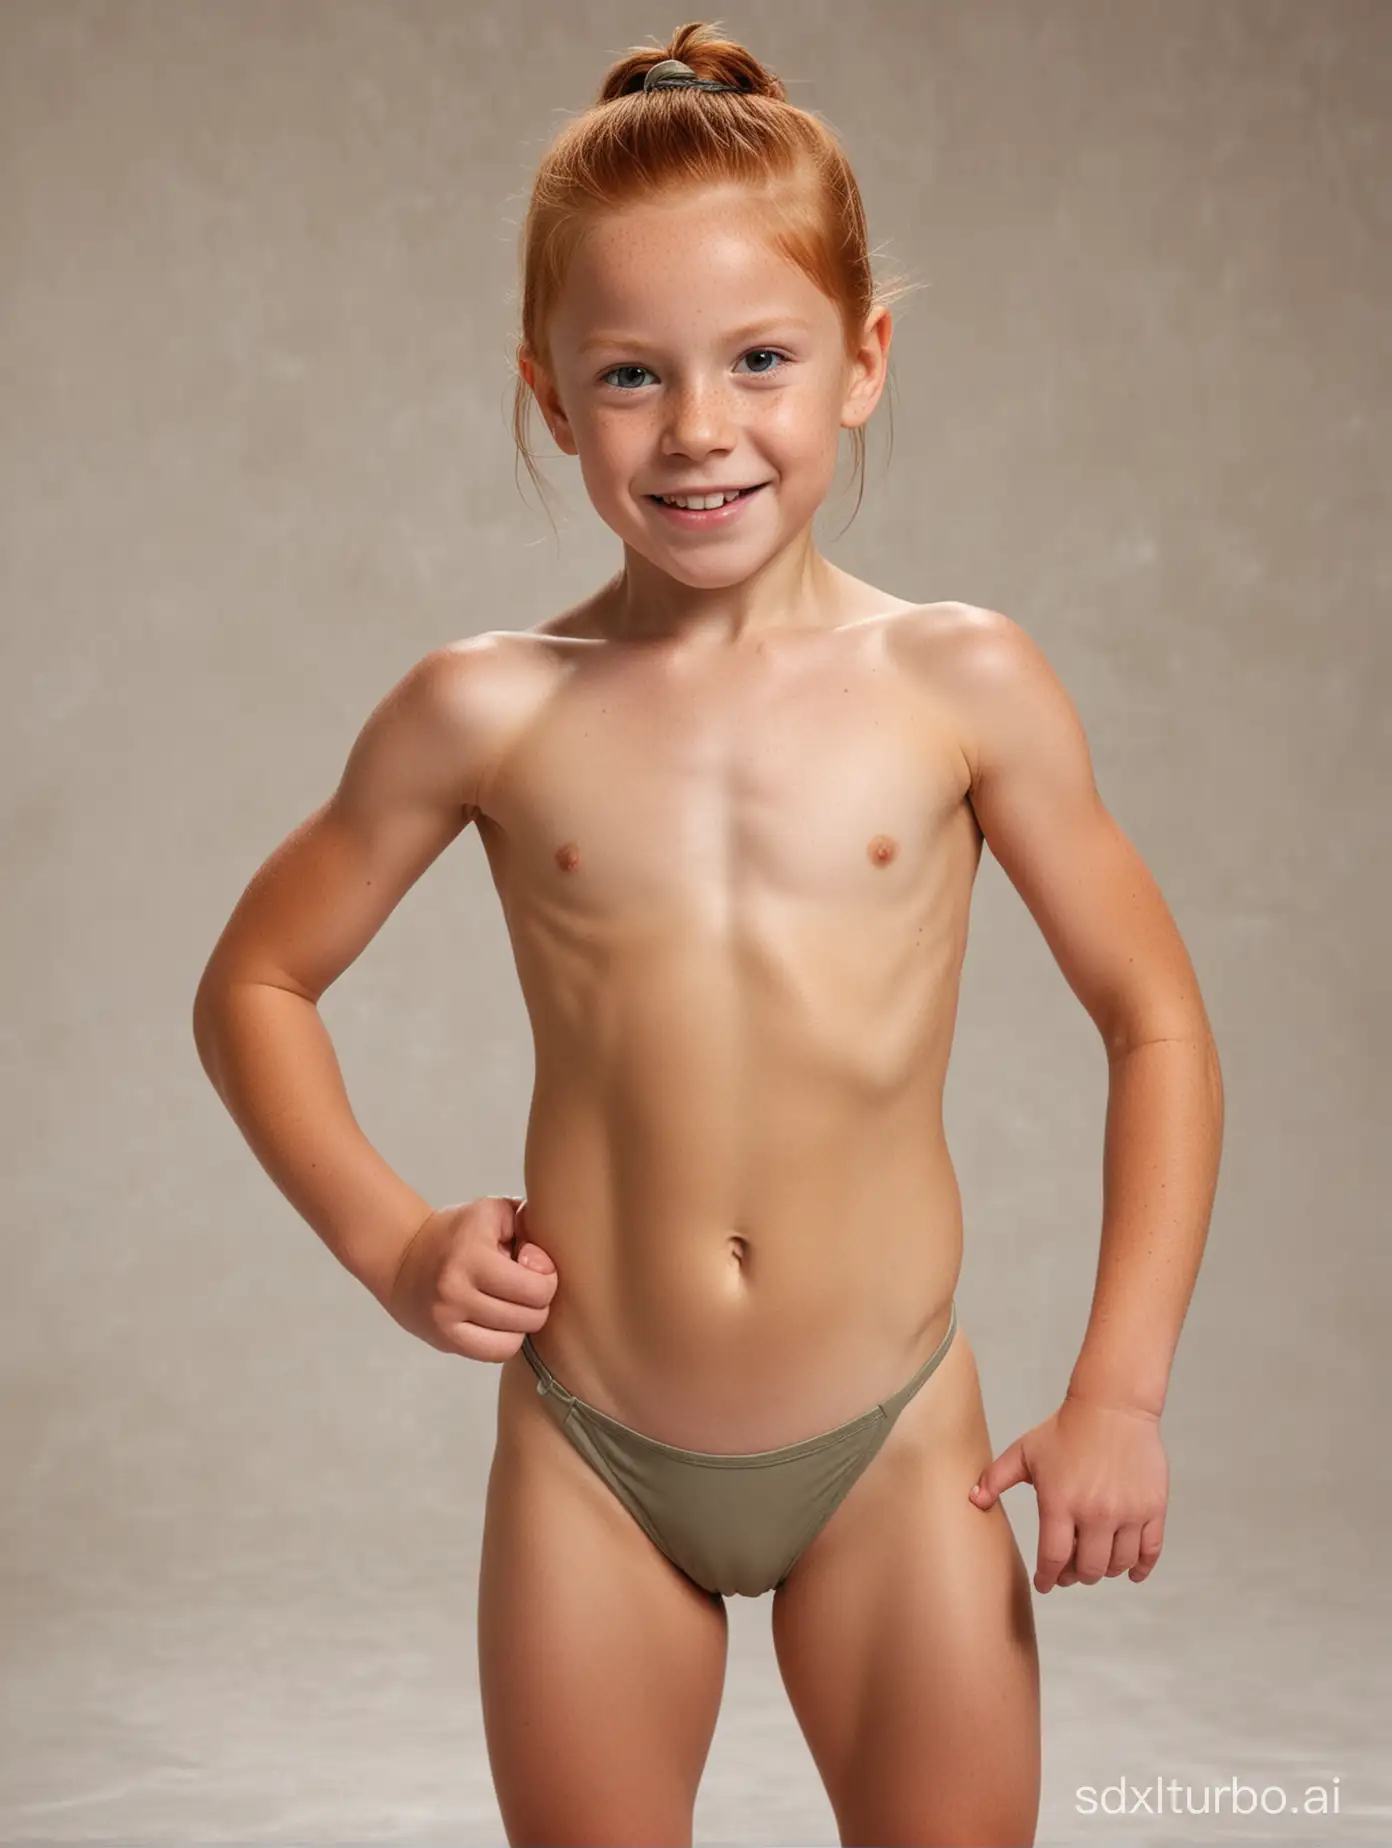 8YearOld-GingerHaired-Girl-with-Muscular-Abs-in-Strong-Bathing-Suit